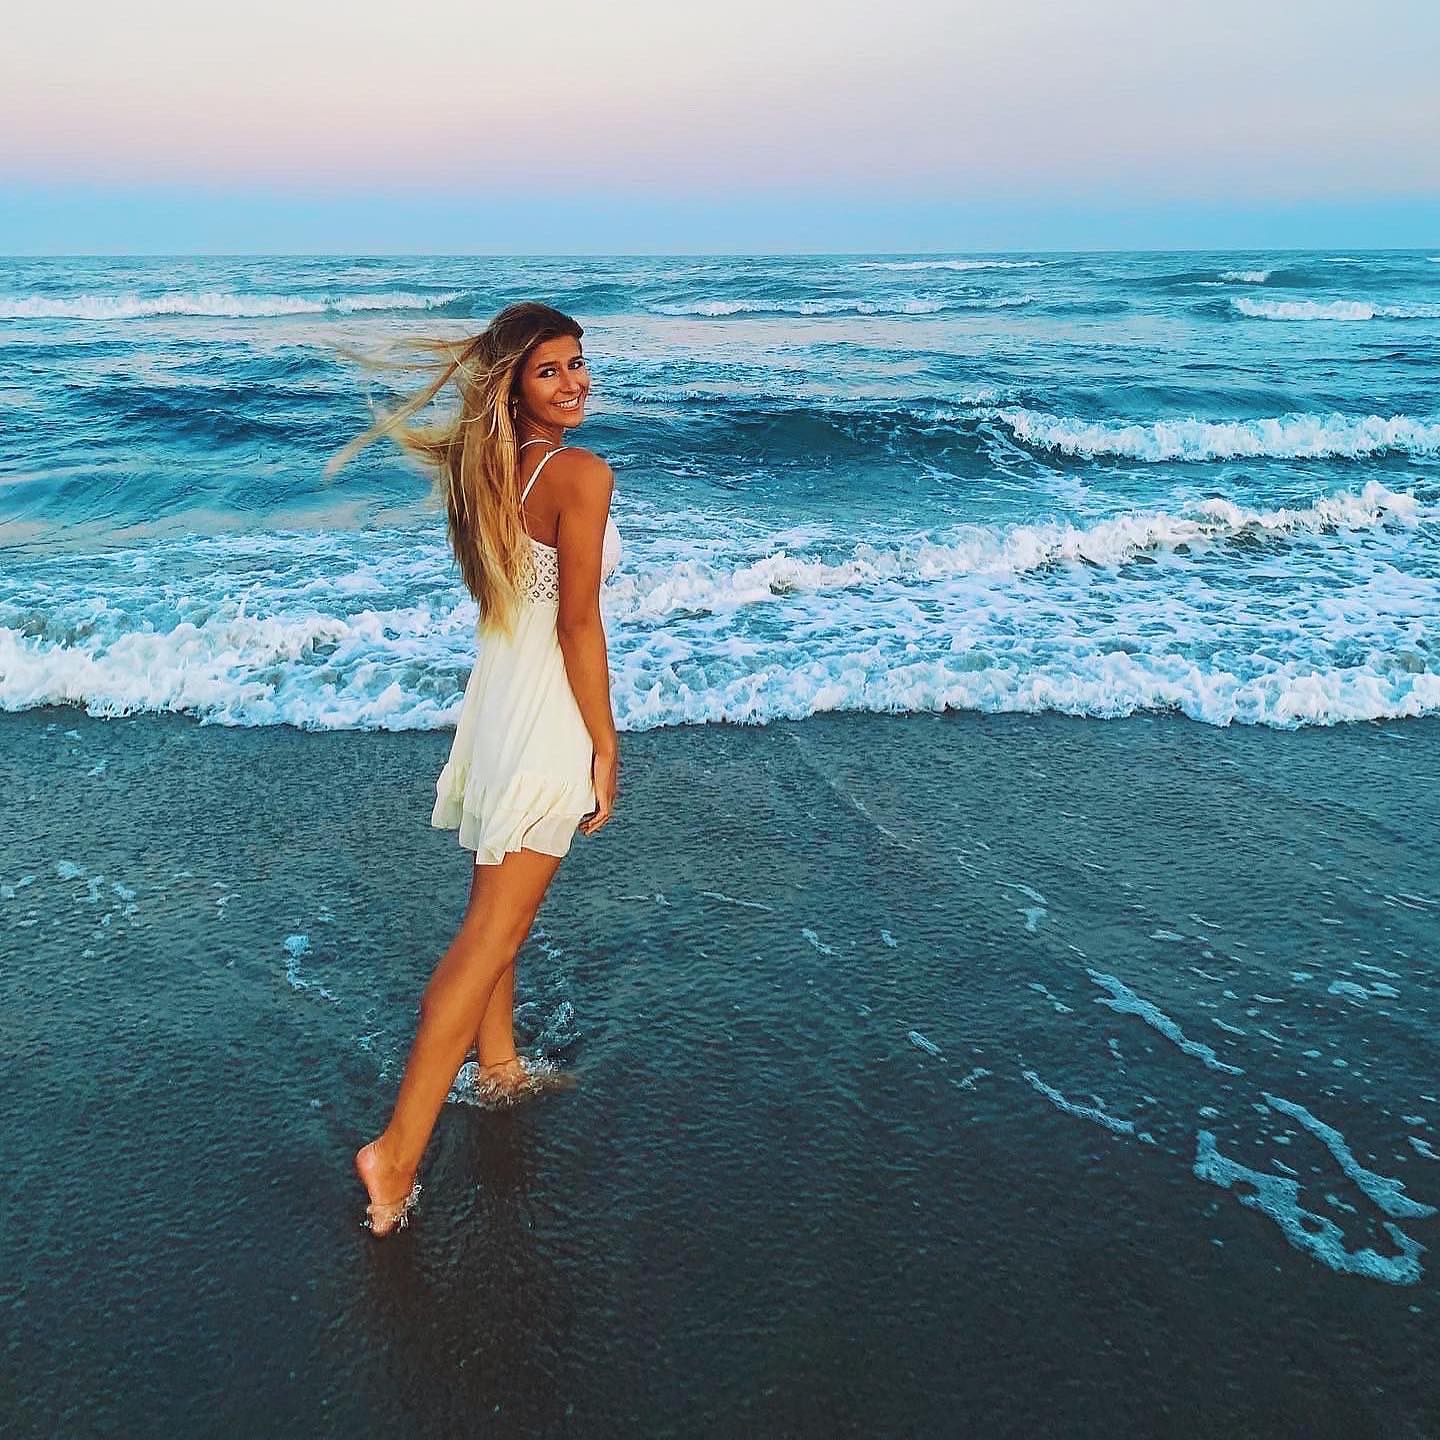 Savannah has spent plenty of time hanging out at California beaches